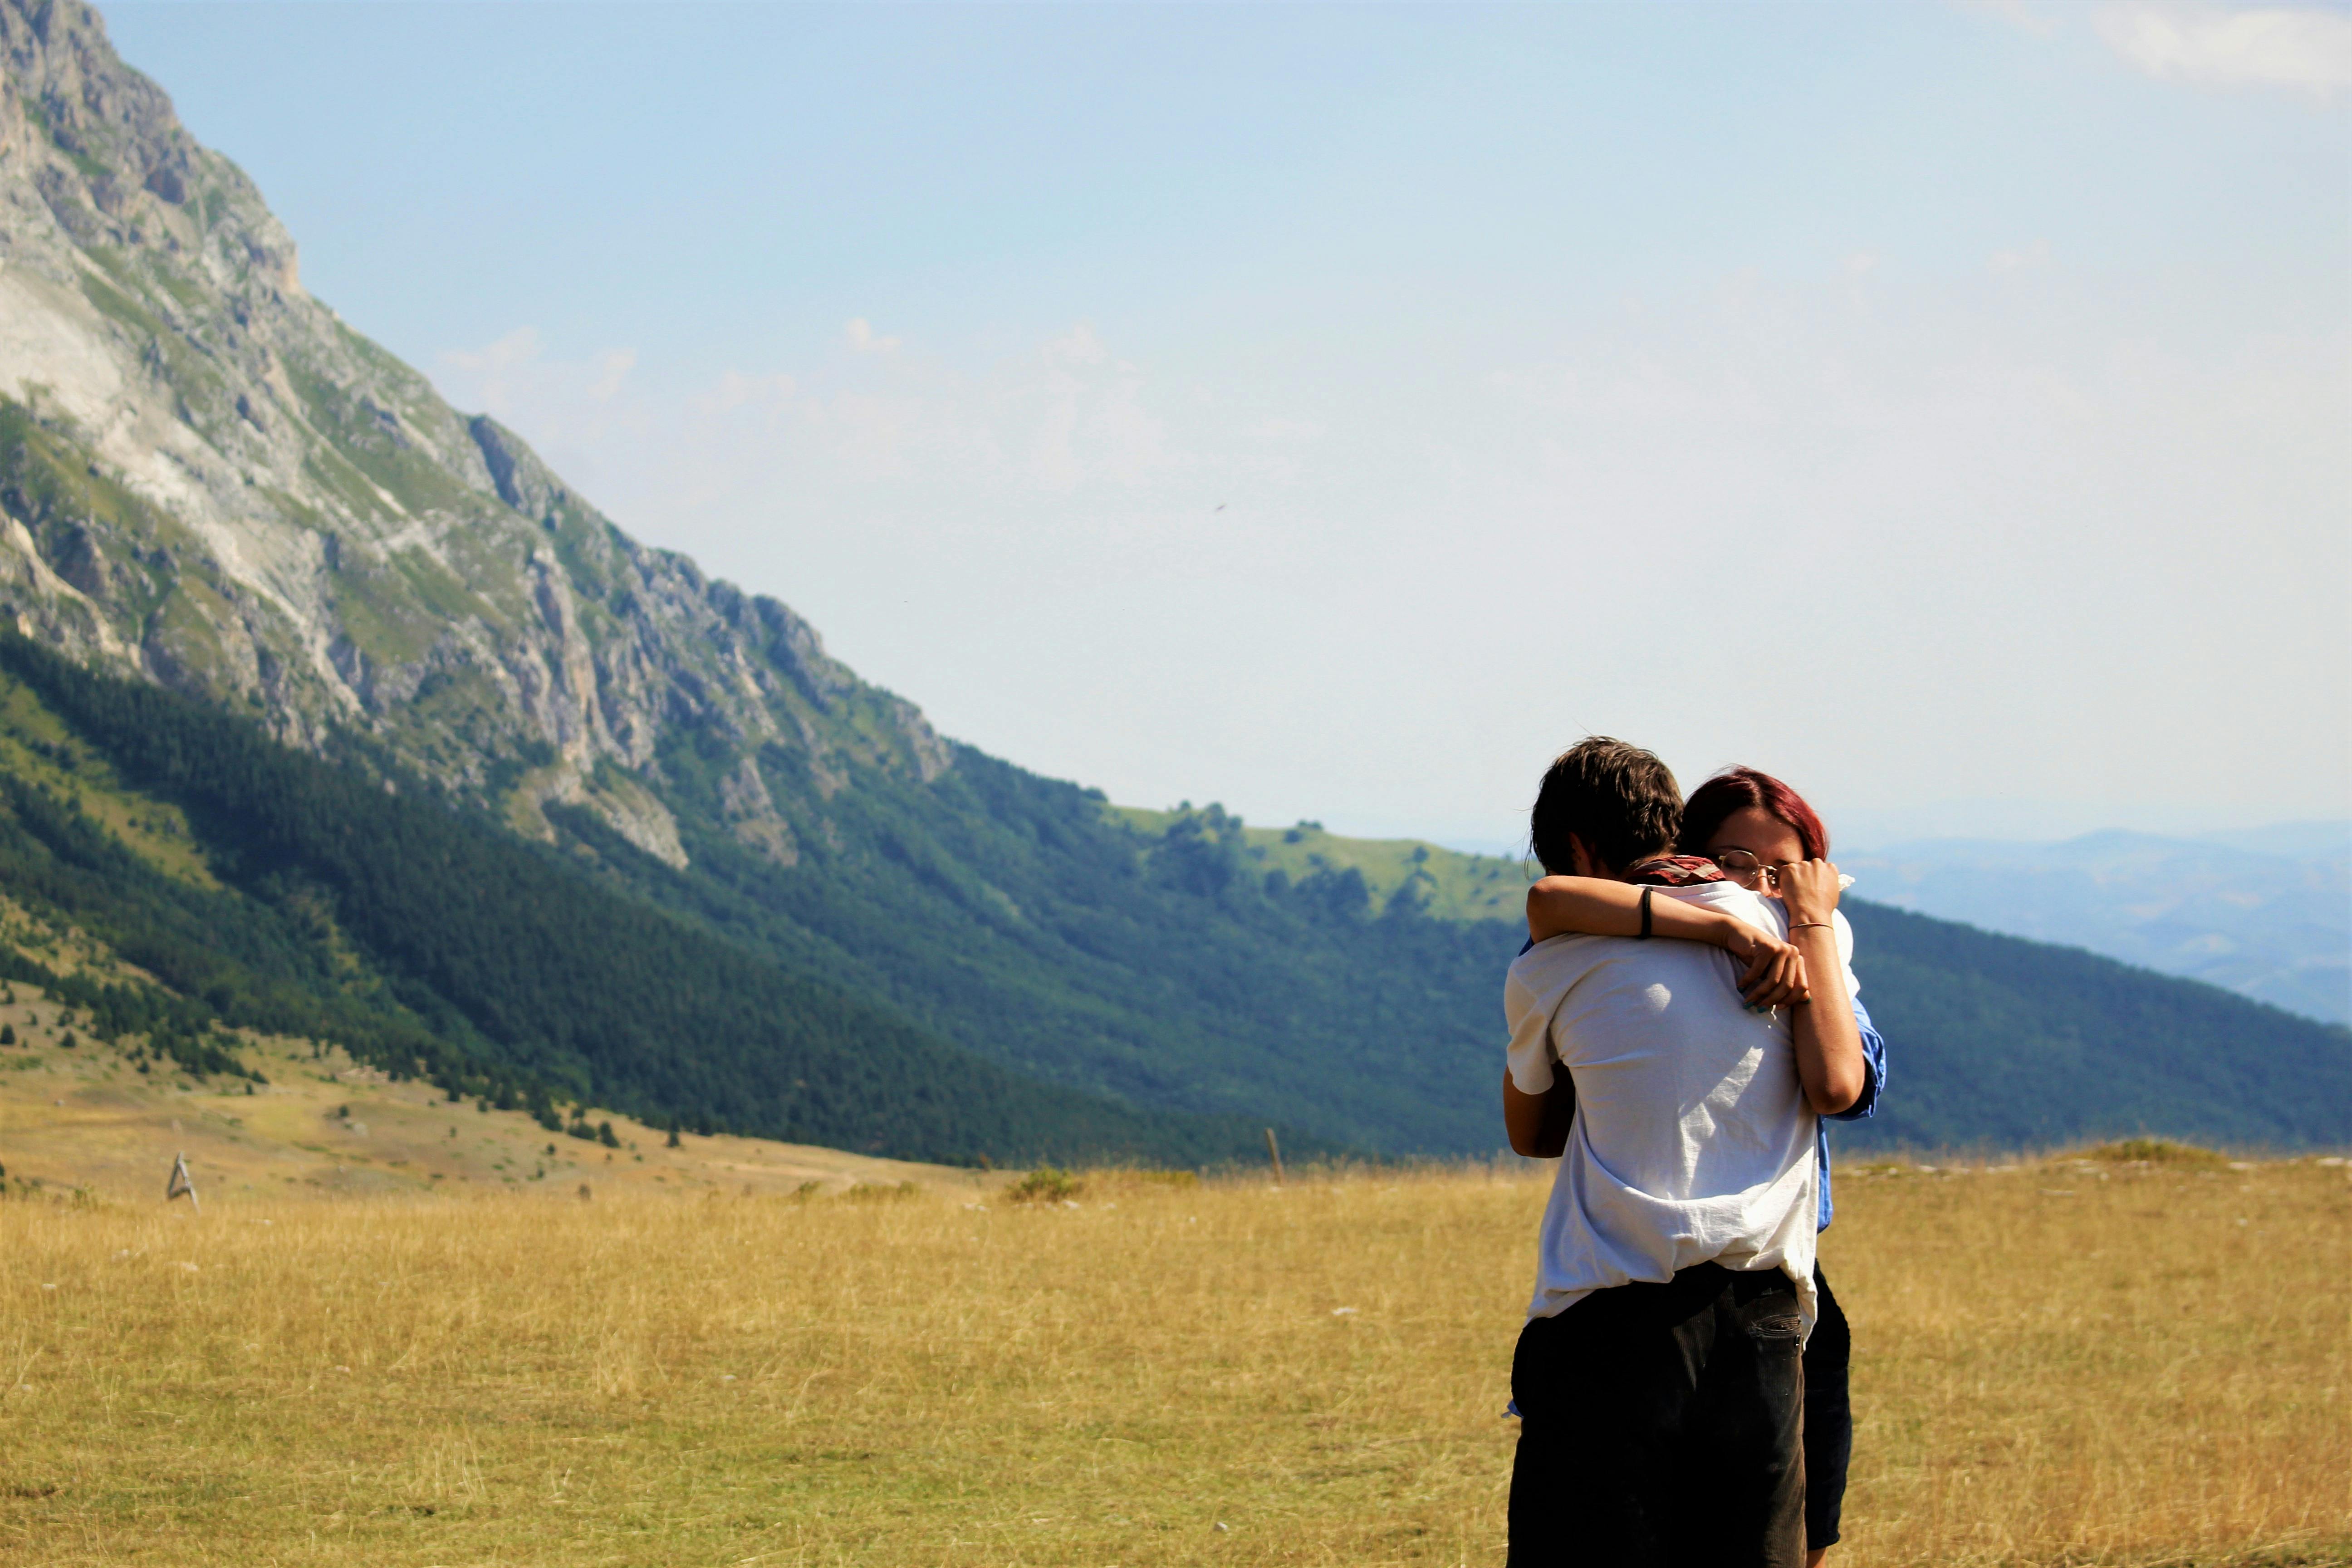 A couple hugging on a grass field | Source: Pexels